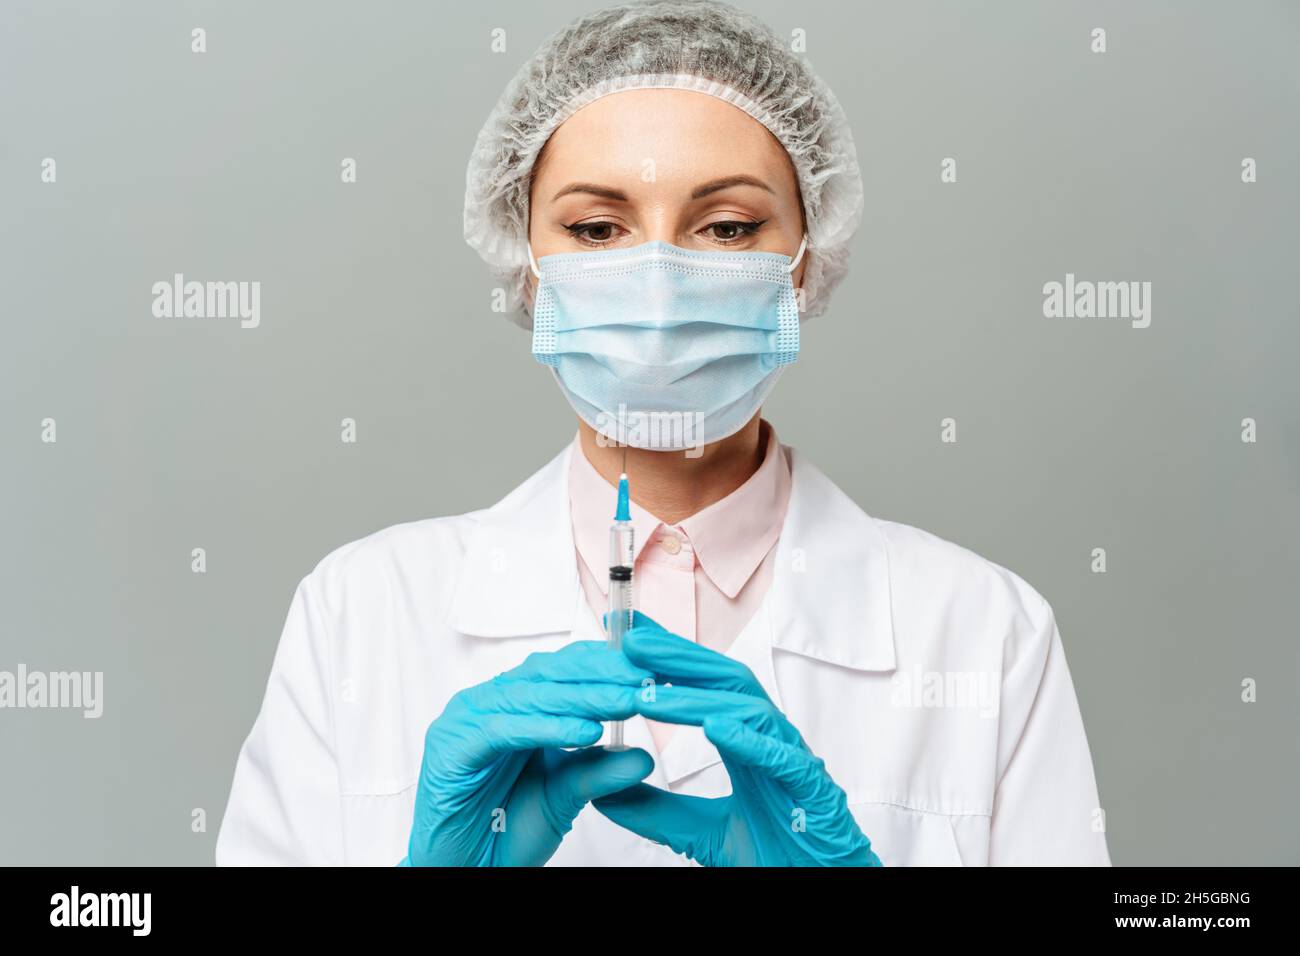 A nurse holds a syringe before making a vaccine against Covid-19 or coronavirus. Stock Photo